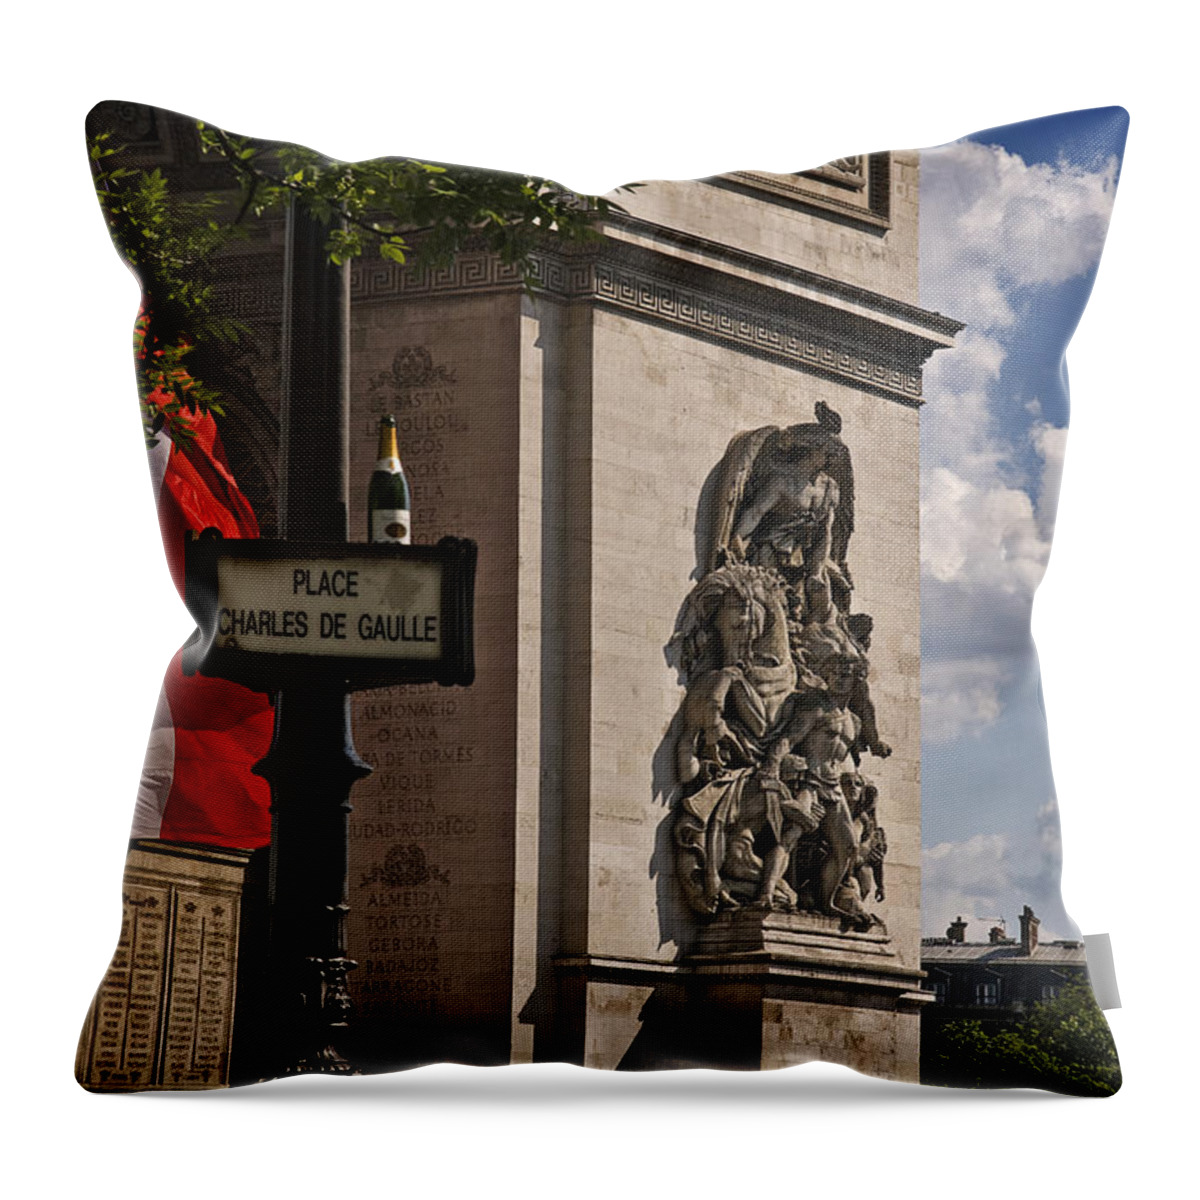 Paris Frame Of Mind Throw Pillow featuring the photograph Paris Frame of Mind by Wes and Dotty Weber